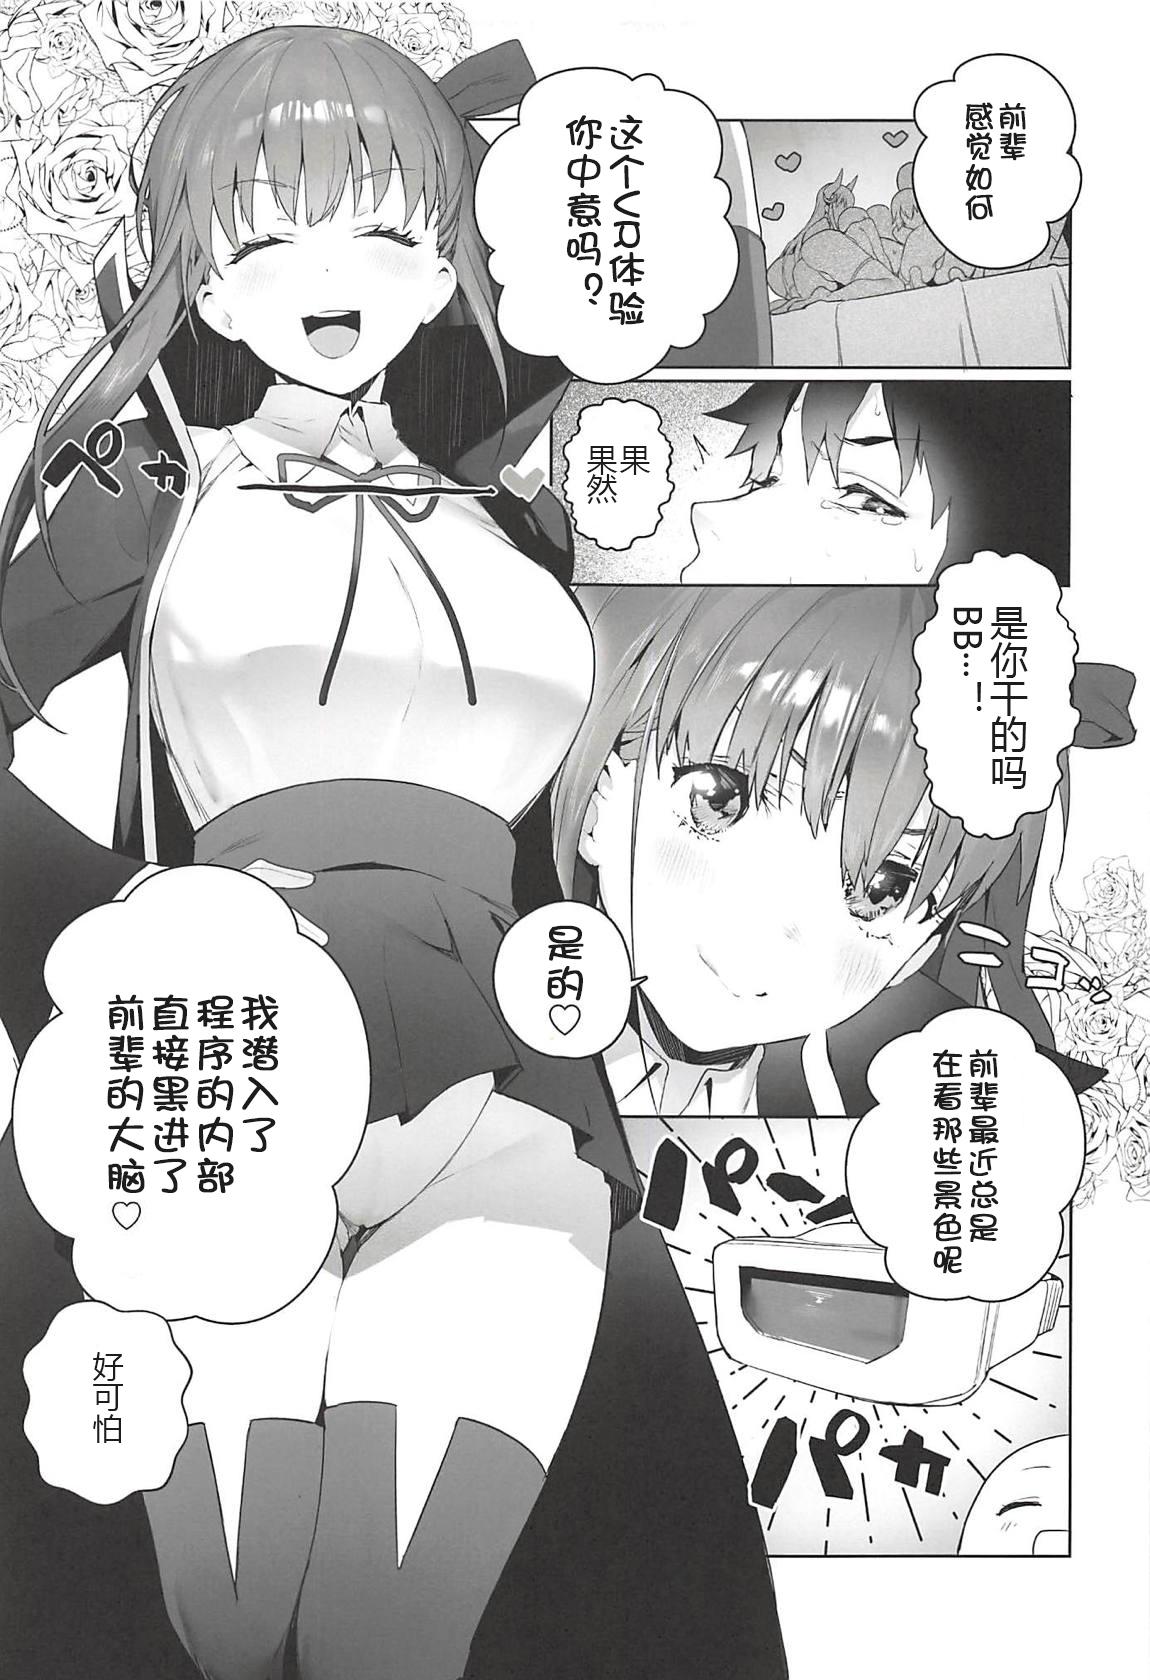 Indo LOVELESS - Fate grand order Gay Physicalexamination - Page 5